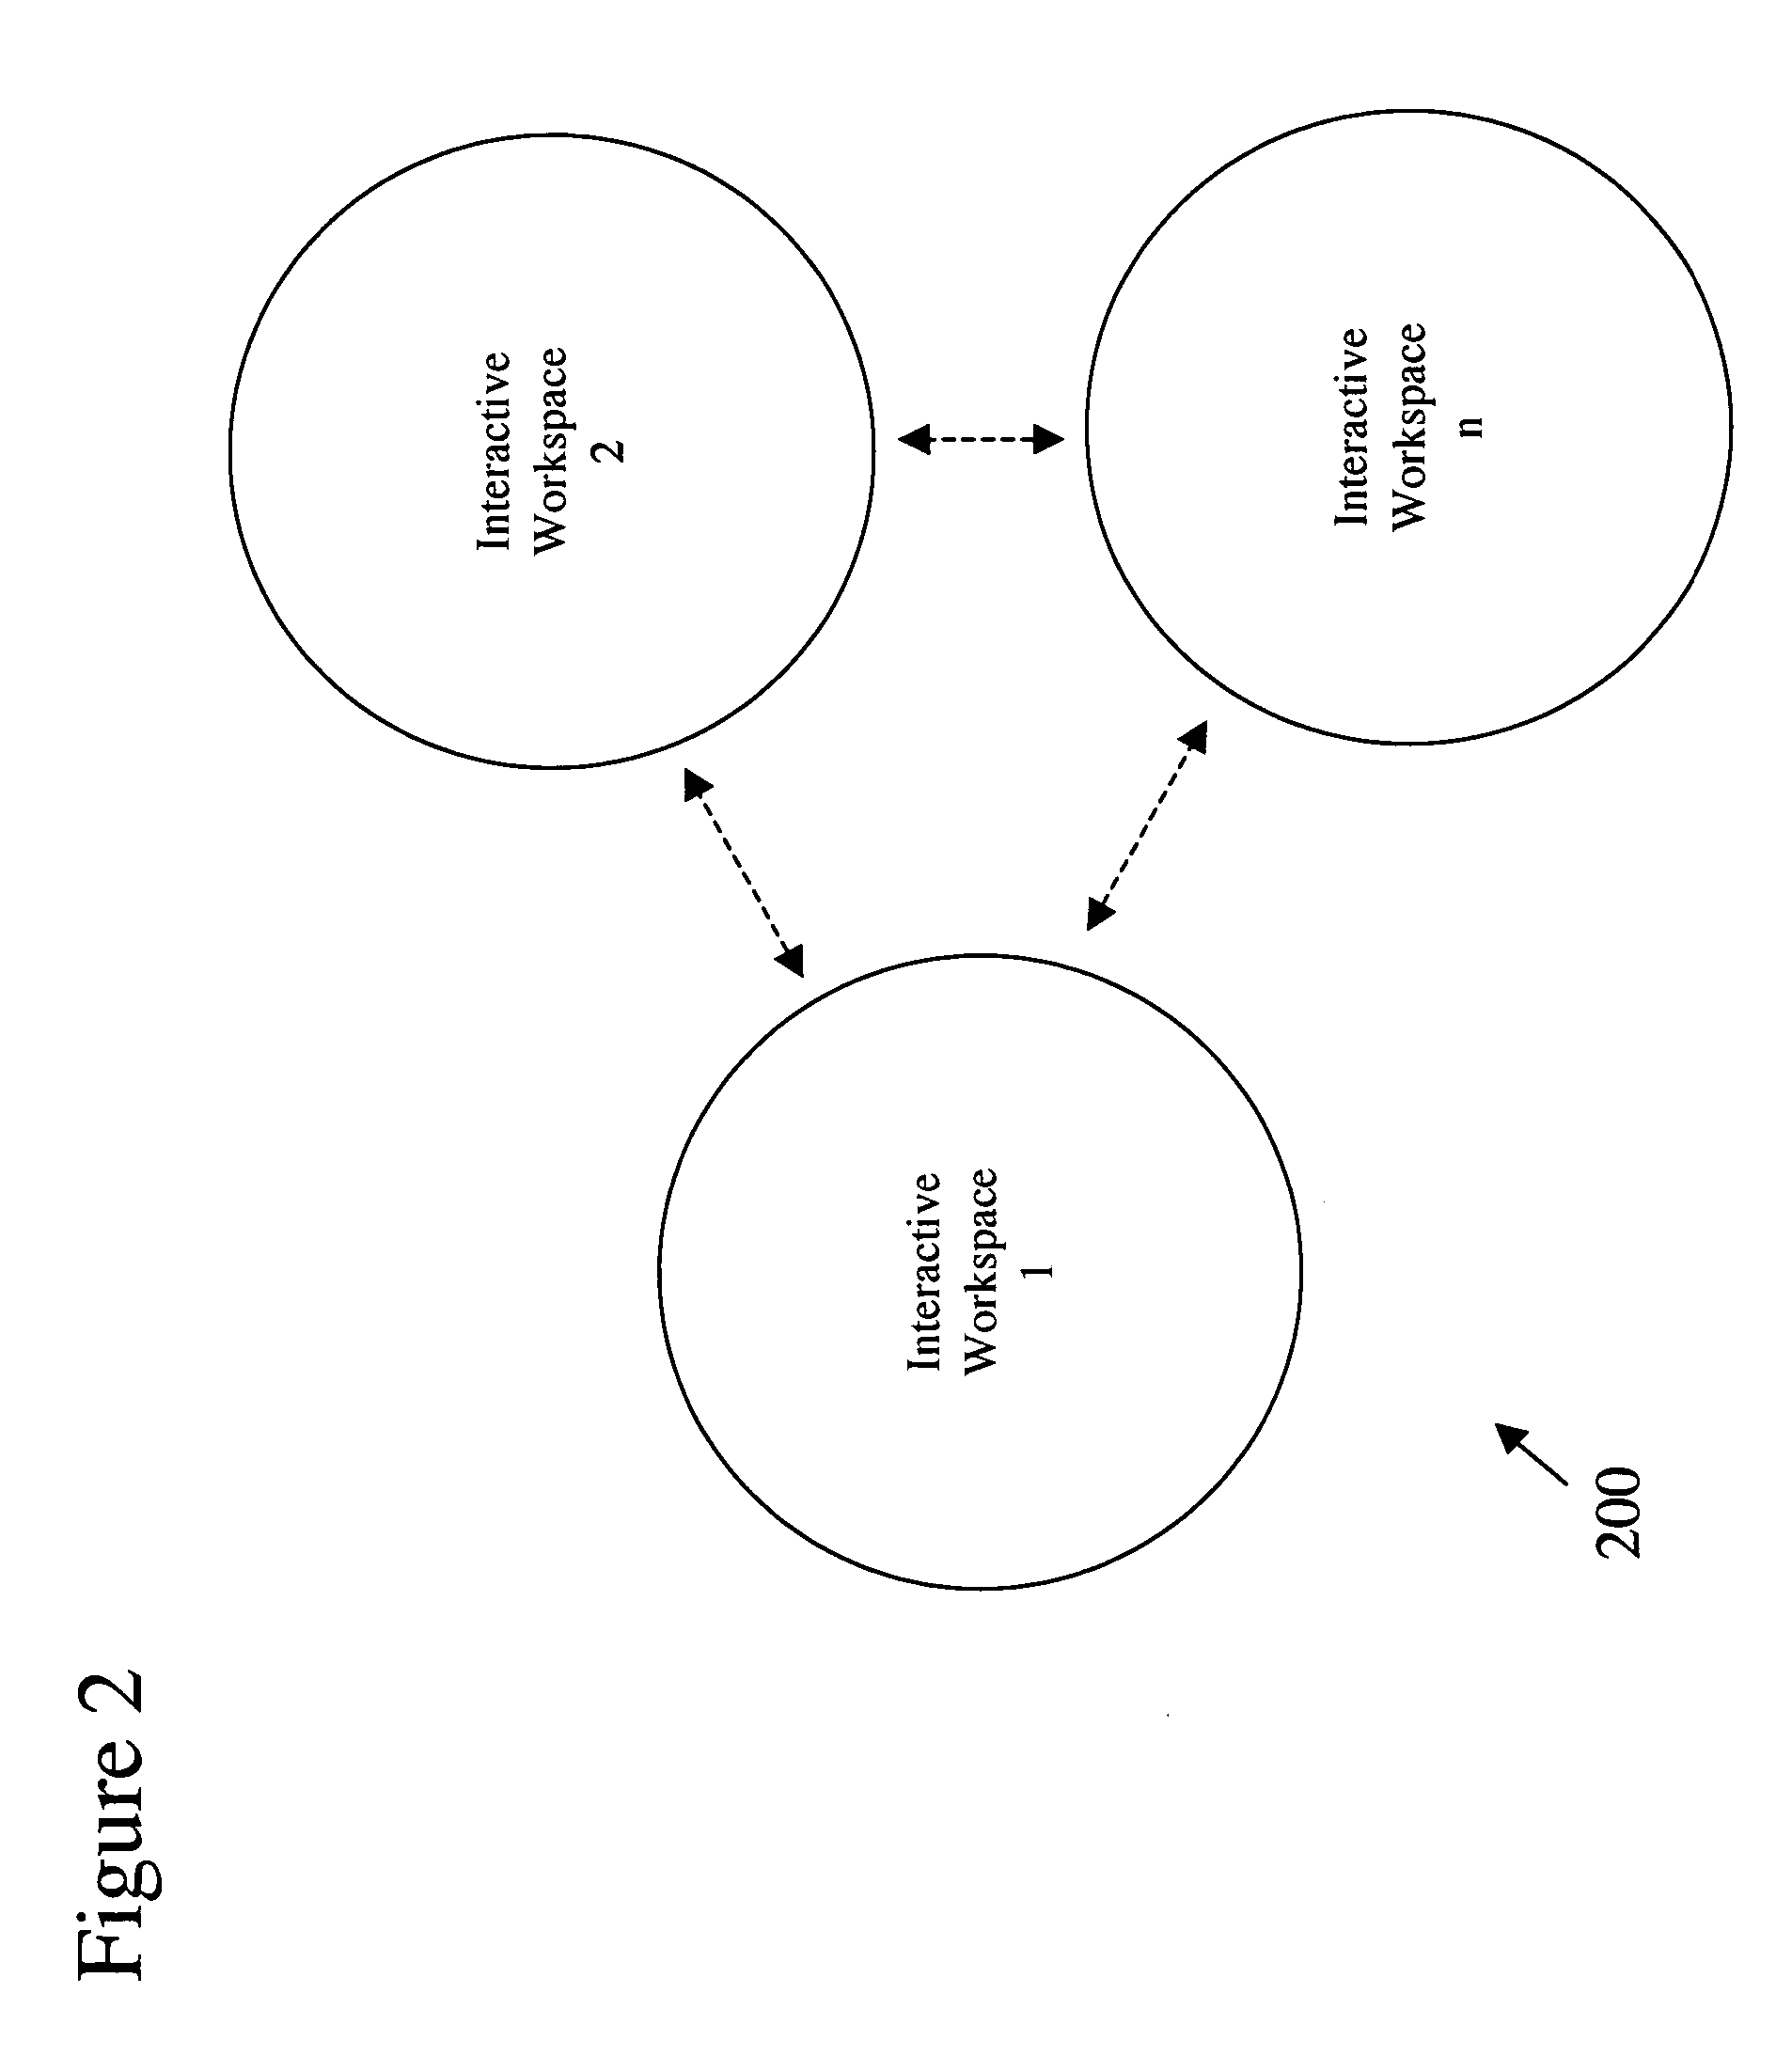 Heterogeneous content channel manager for ubiquitous computer software systems